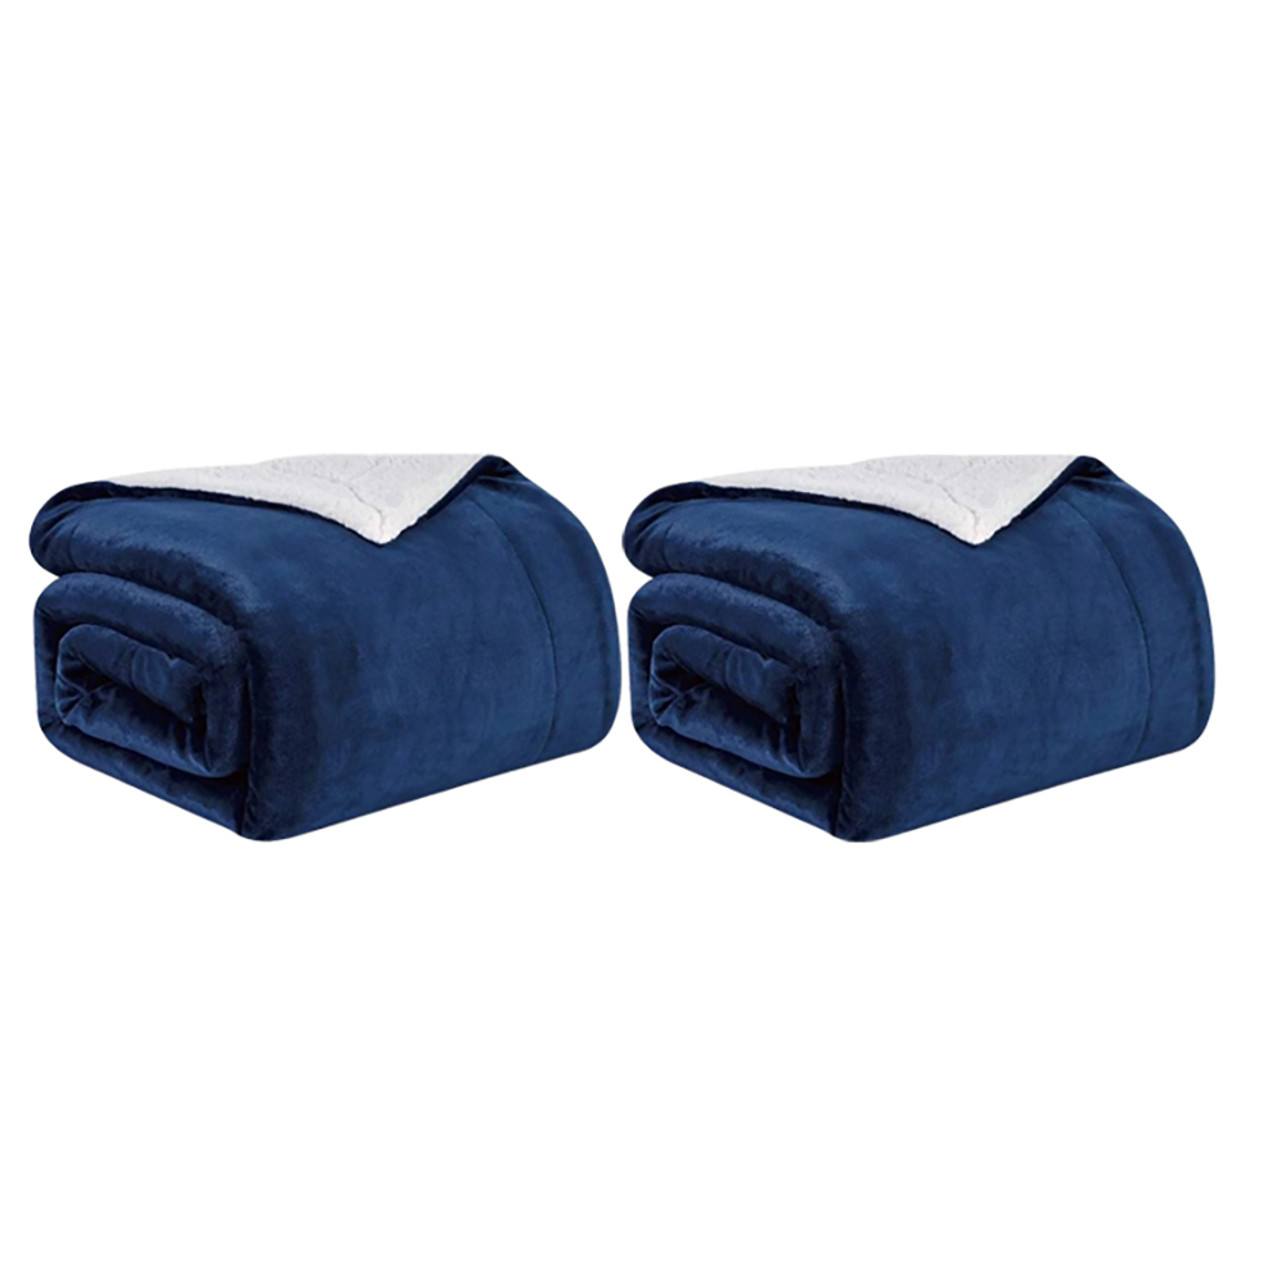 Lightweight Super Soft Cozy Sherpa Fleece Throw Blanket (2-Pack) product image